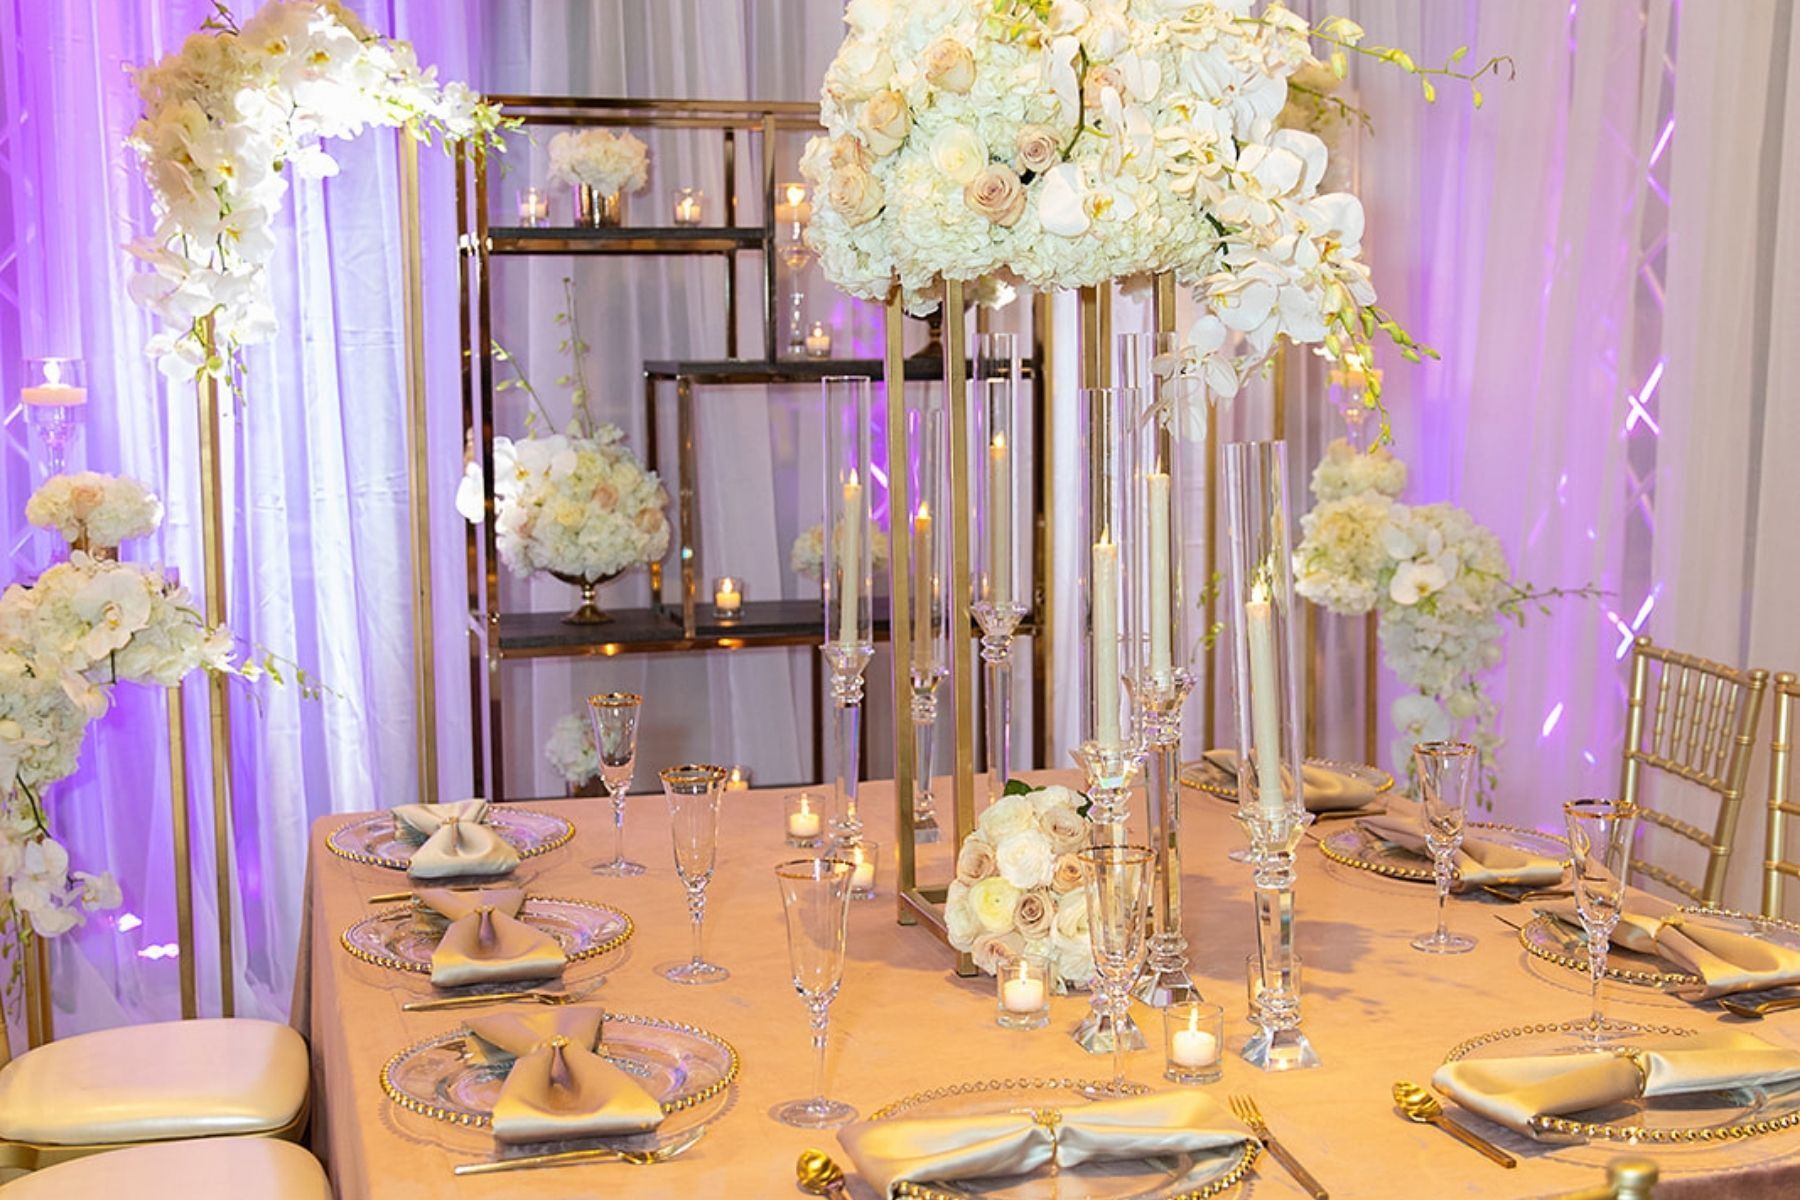 See the lates trends in linens, wedding centerpieces, flowers and mroe